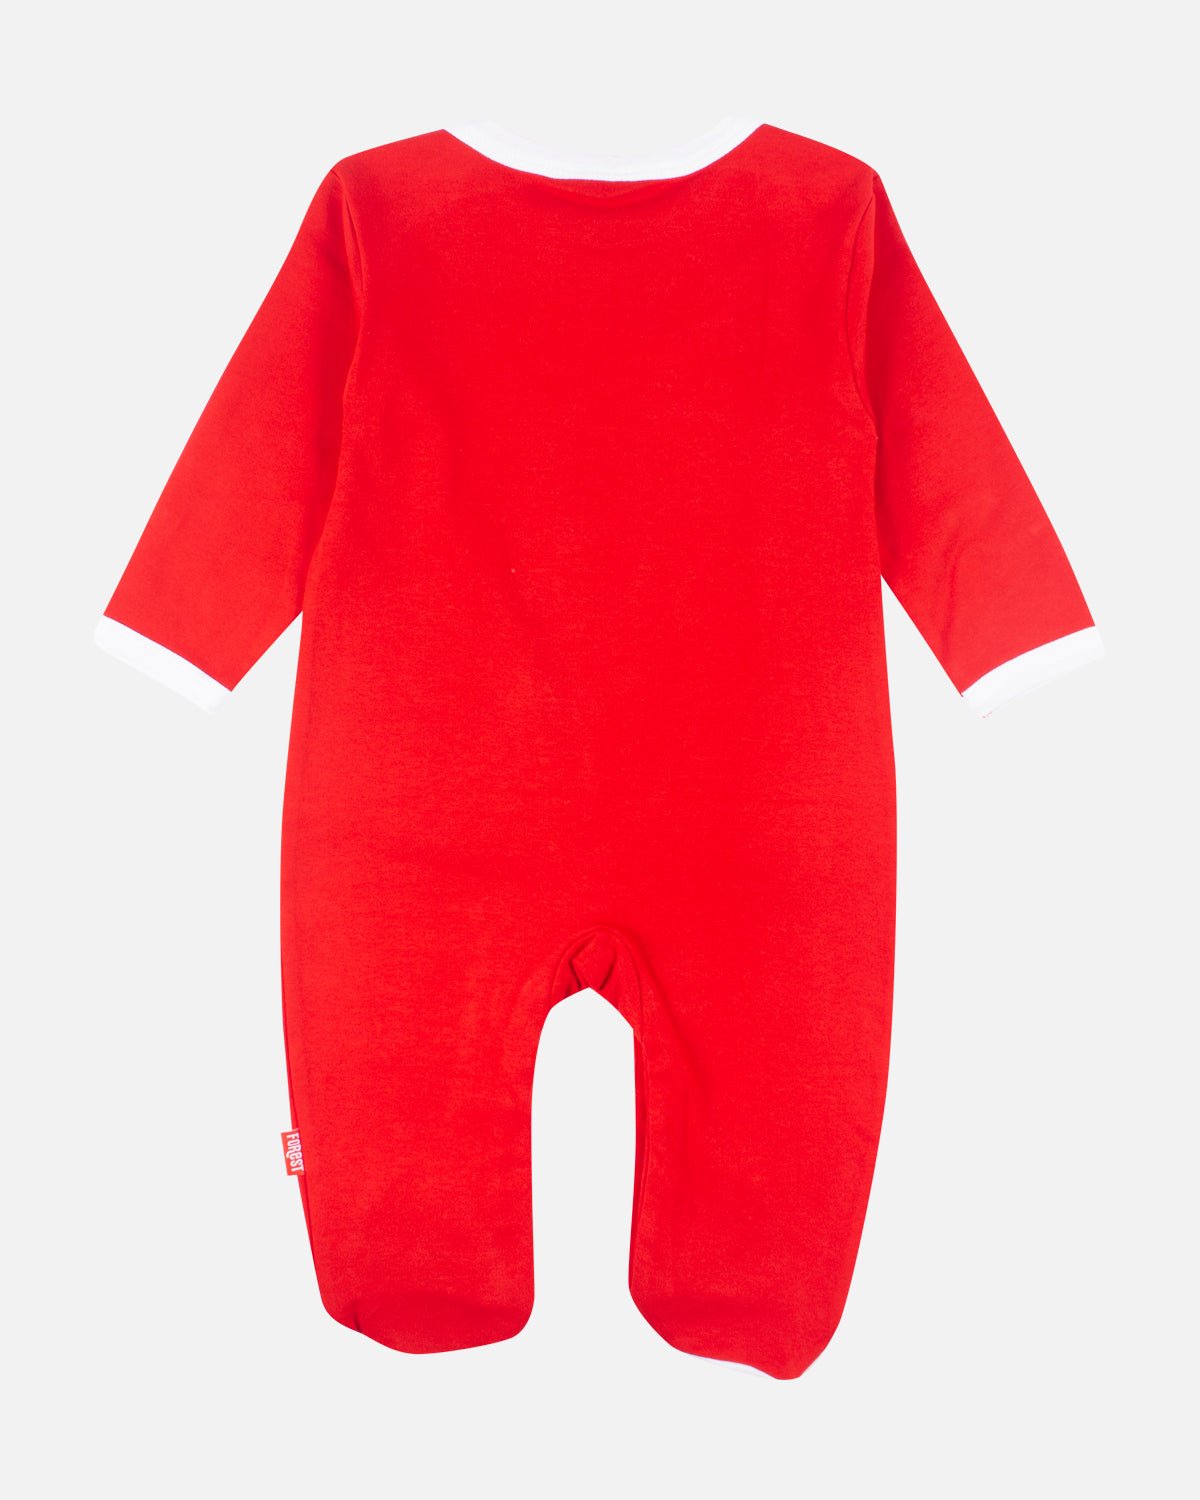 NFFC Red Baby Sleepsuit - Nottingham Forest FC